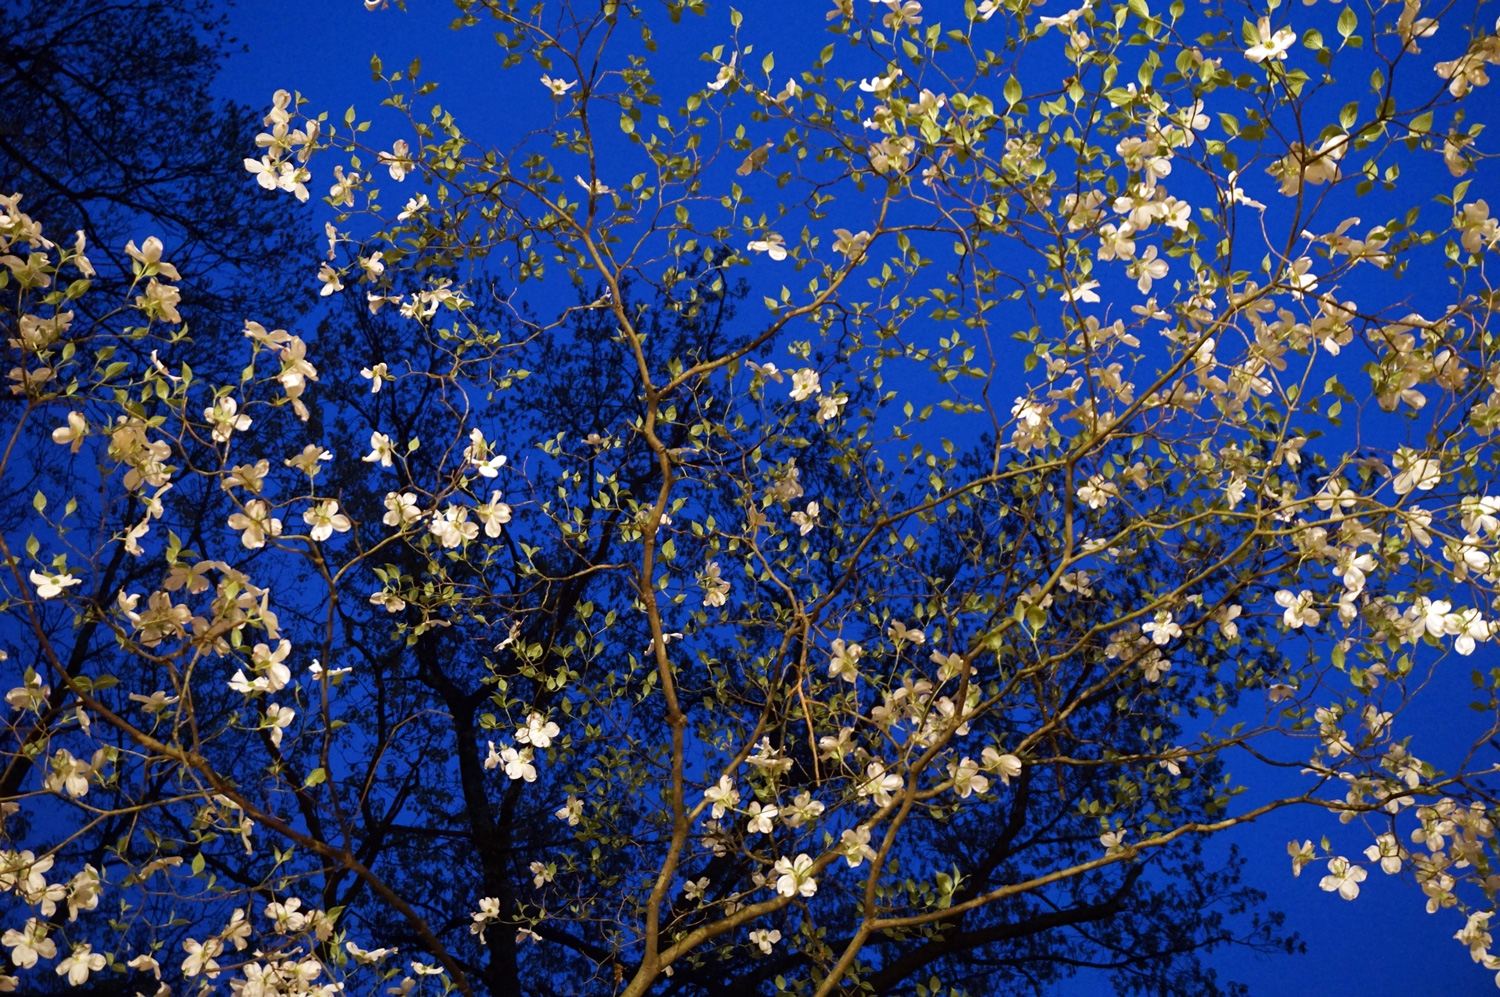 Dogwood at the blue hour